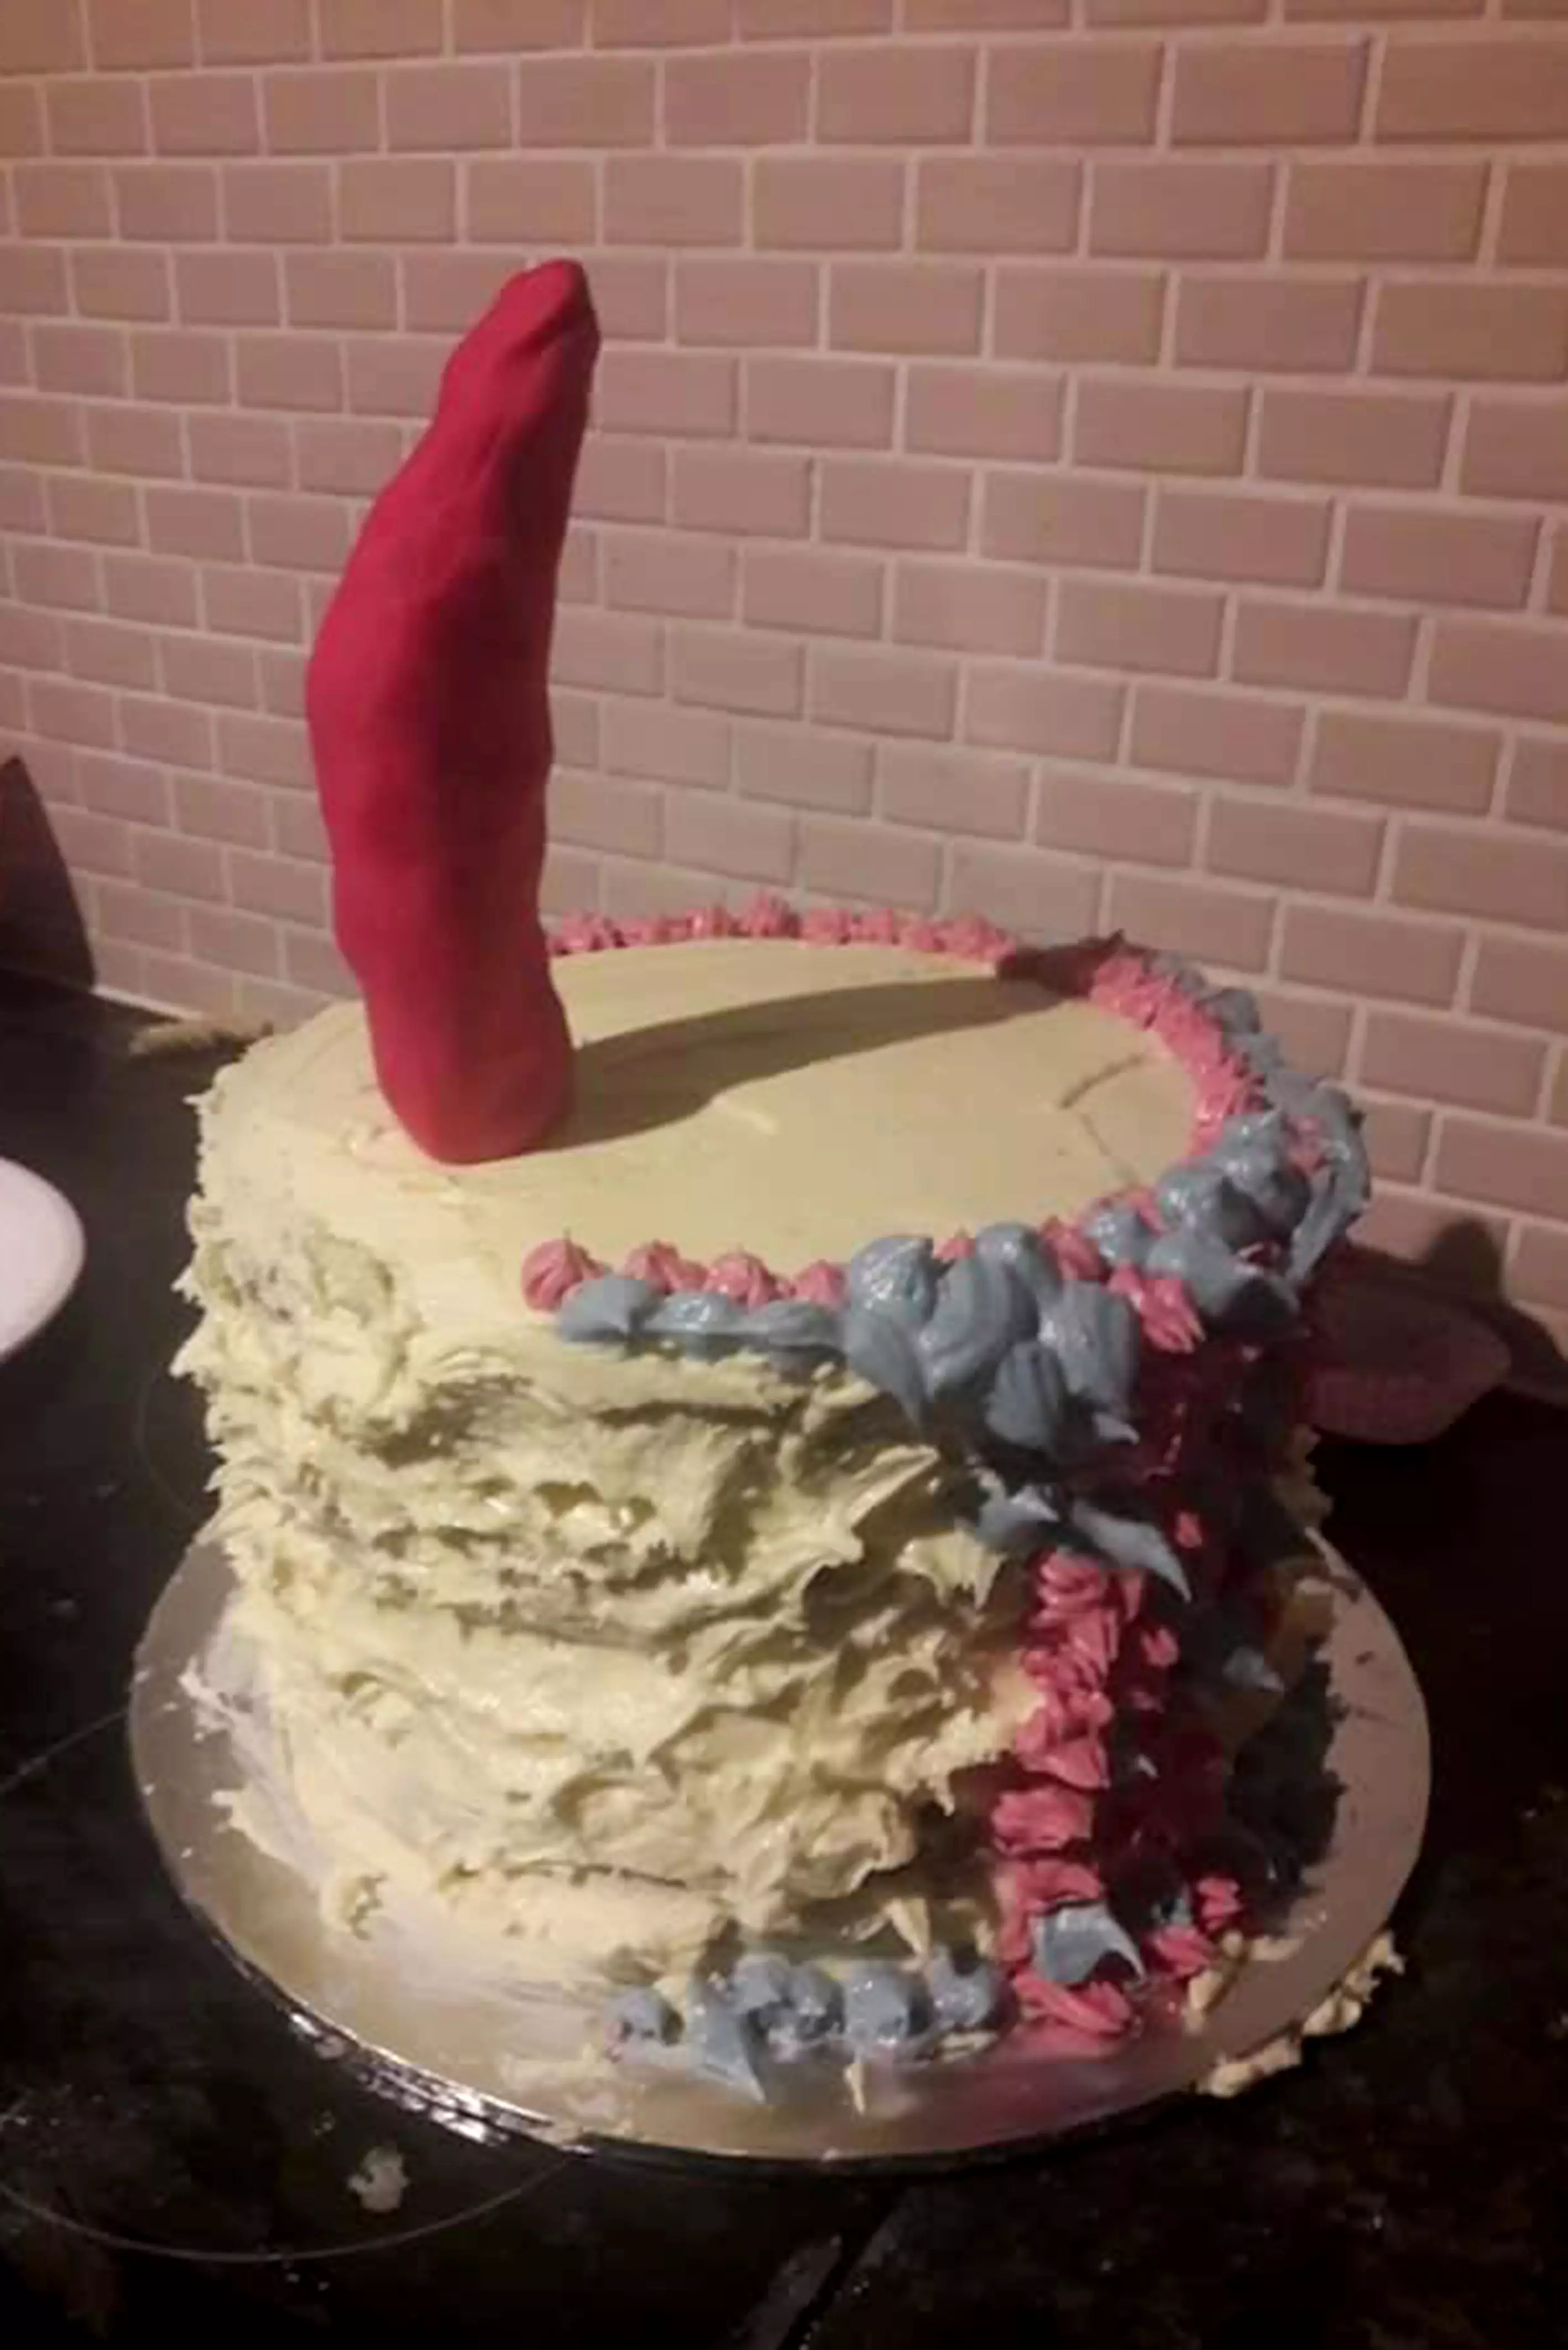 Danielle Adams' friends thought the cake looked more like a dildo than a unicorn.